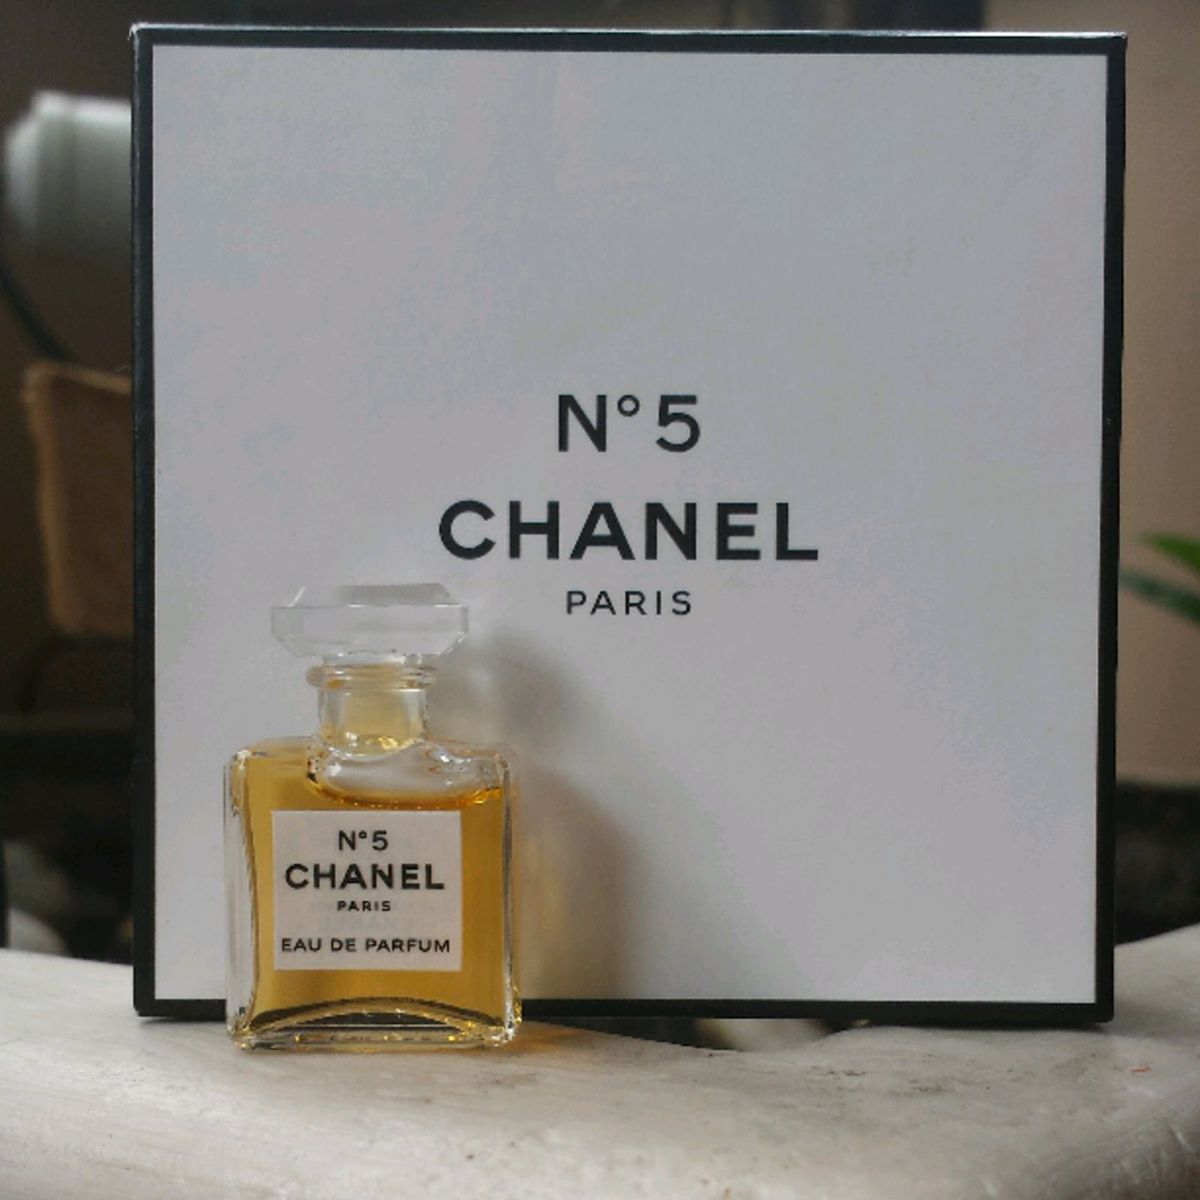 Collectible Vintage Chanel No 5 Fragrance Bottle. About 1/3 